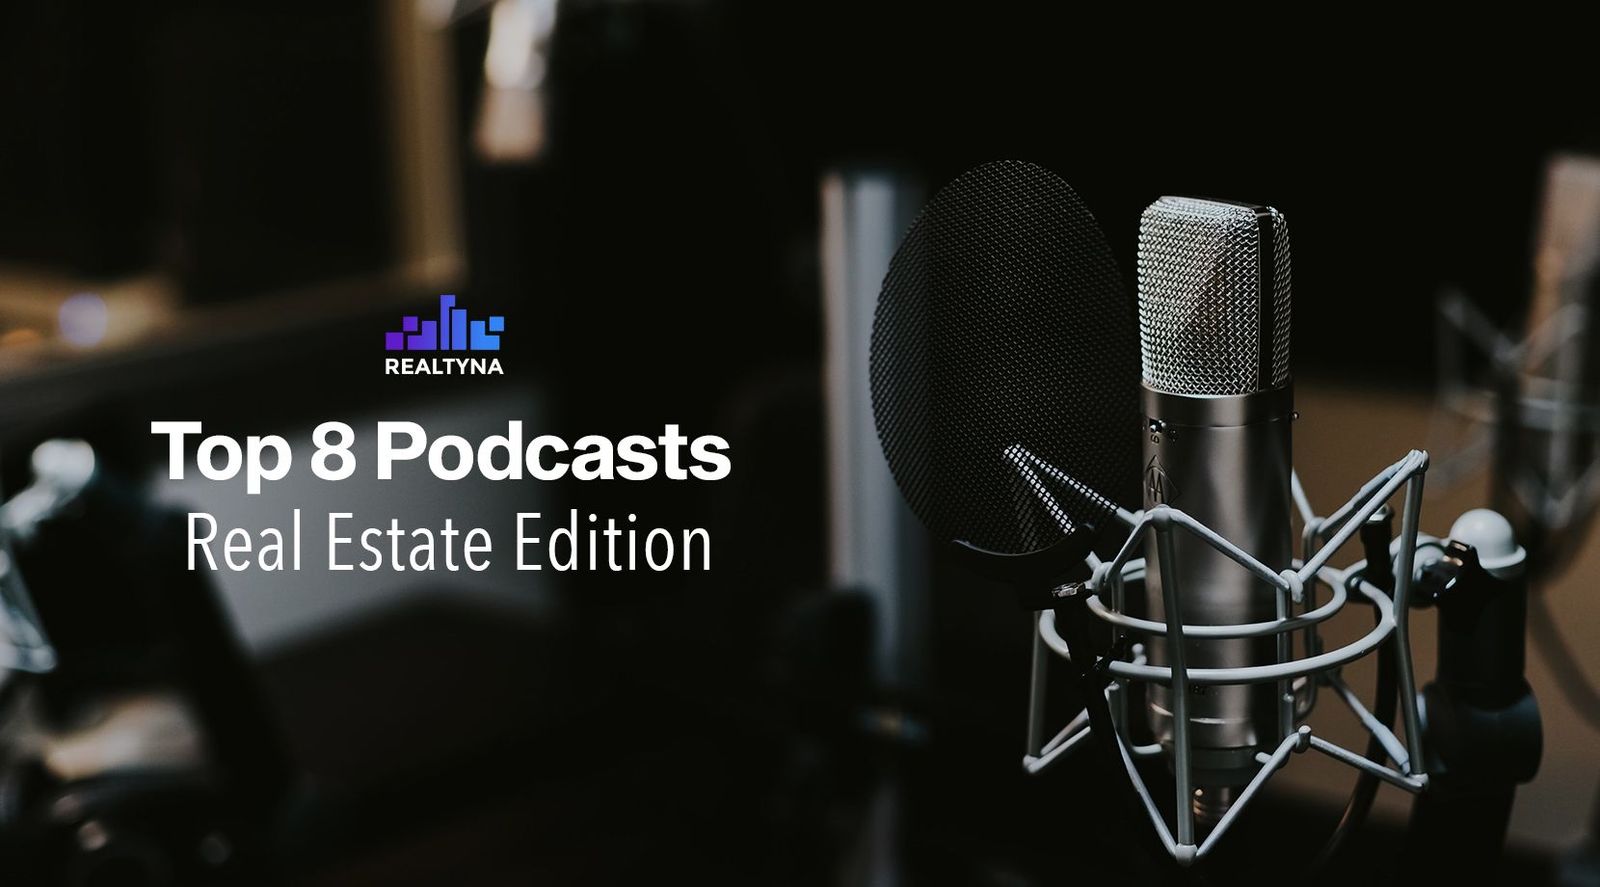 Top 8 Podcasts - Real Estate Edition